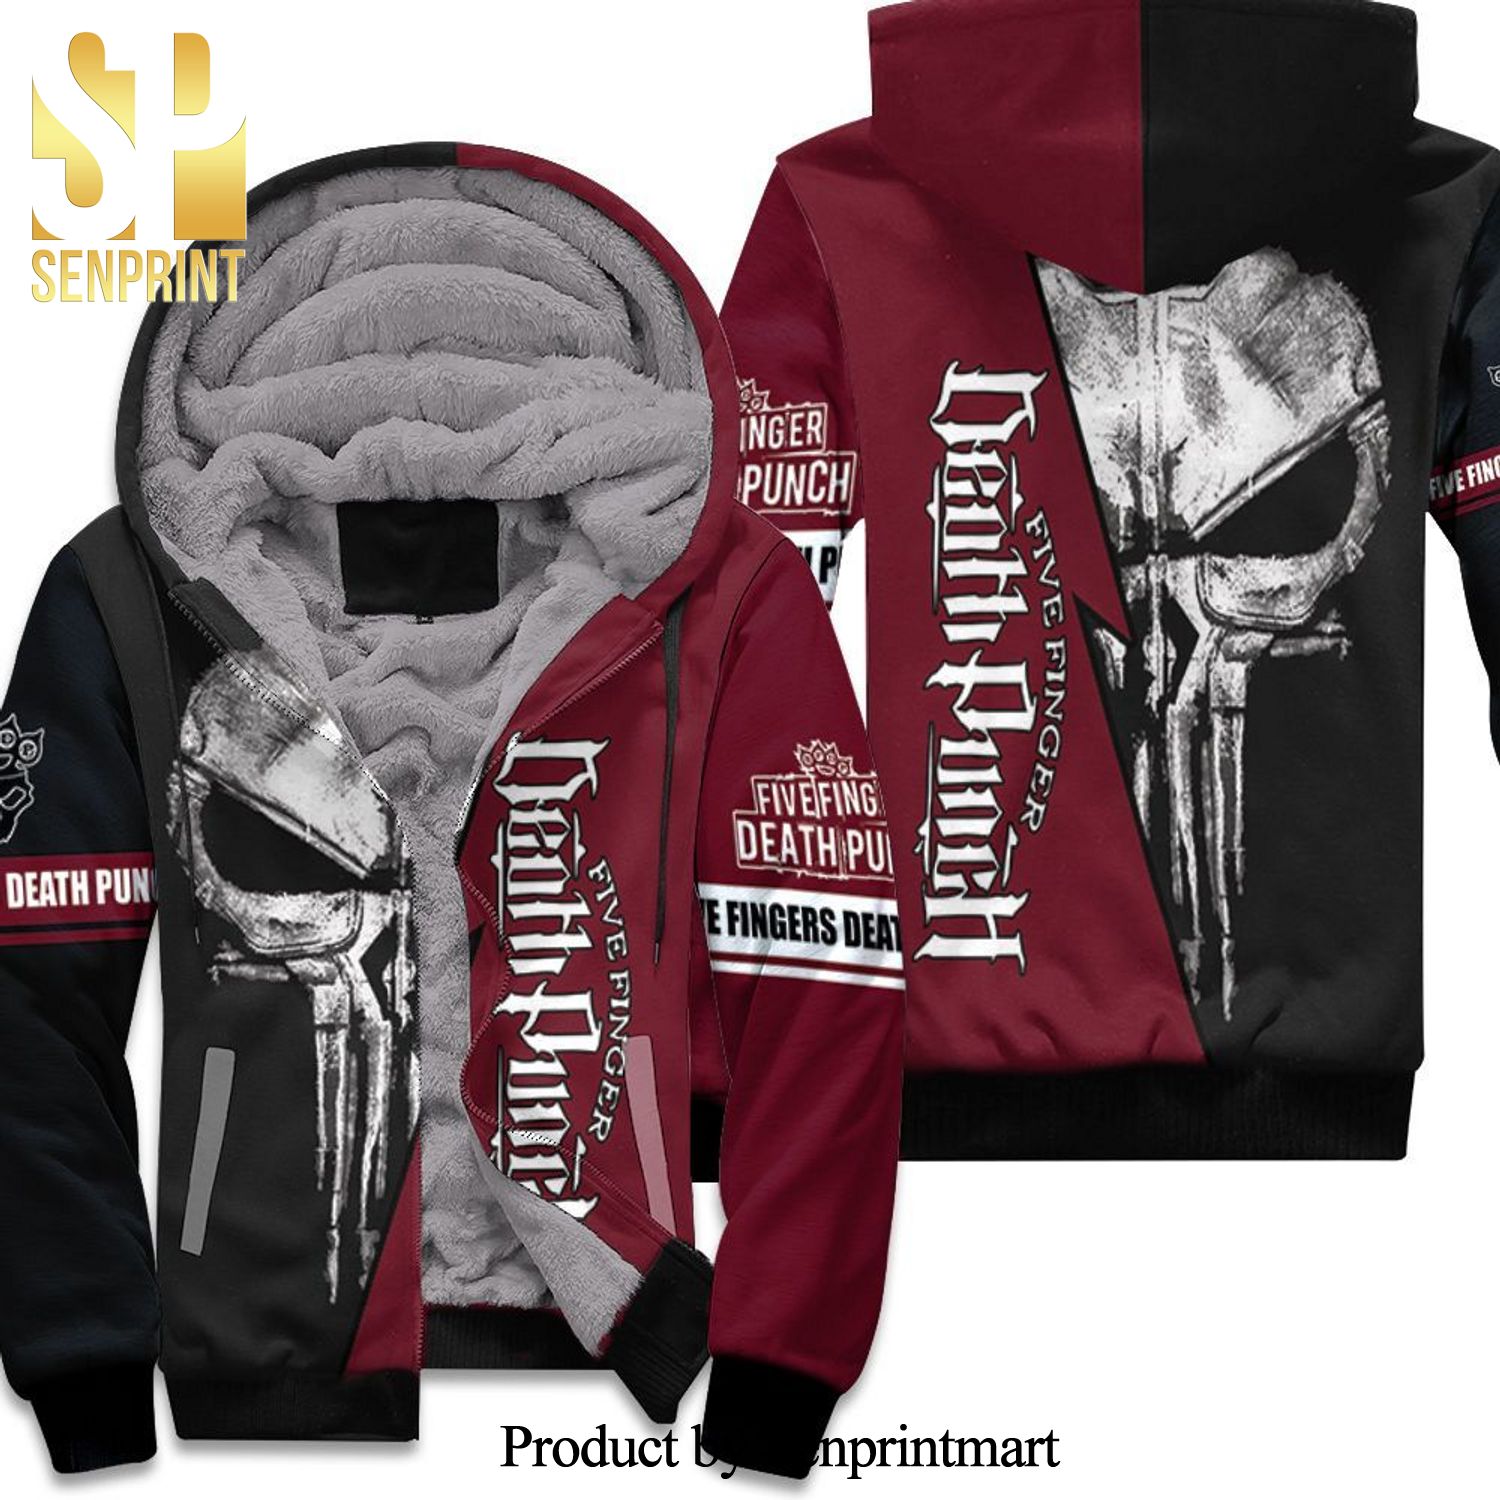 Five Fingers Death Skull For Lovers Hot Version All Over Printed Unisex Fleece Hoodie